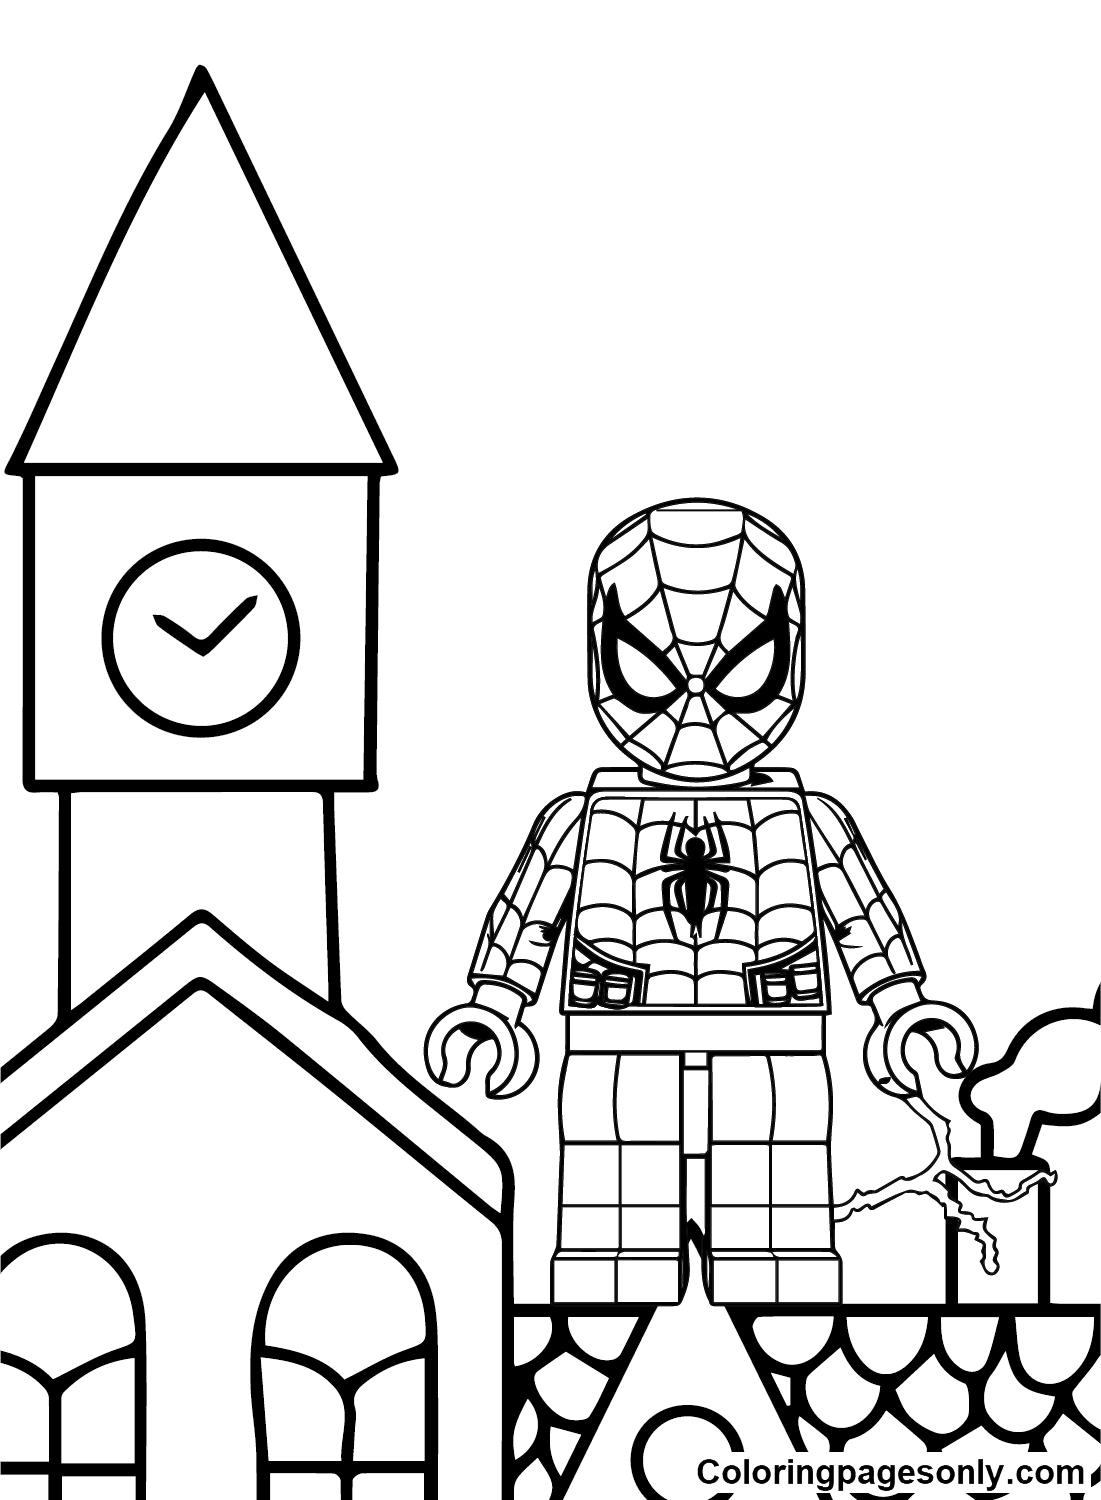 Images Lego Spiderman Coloring Page